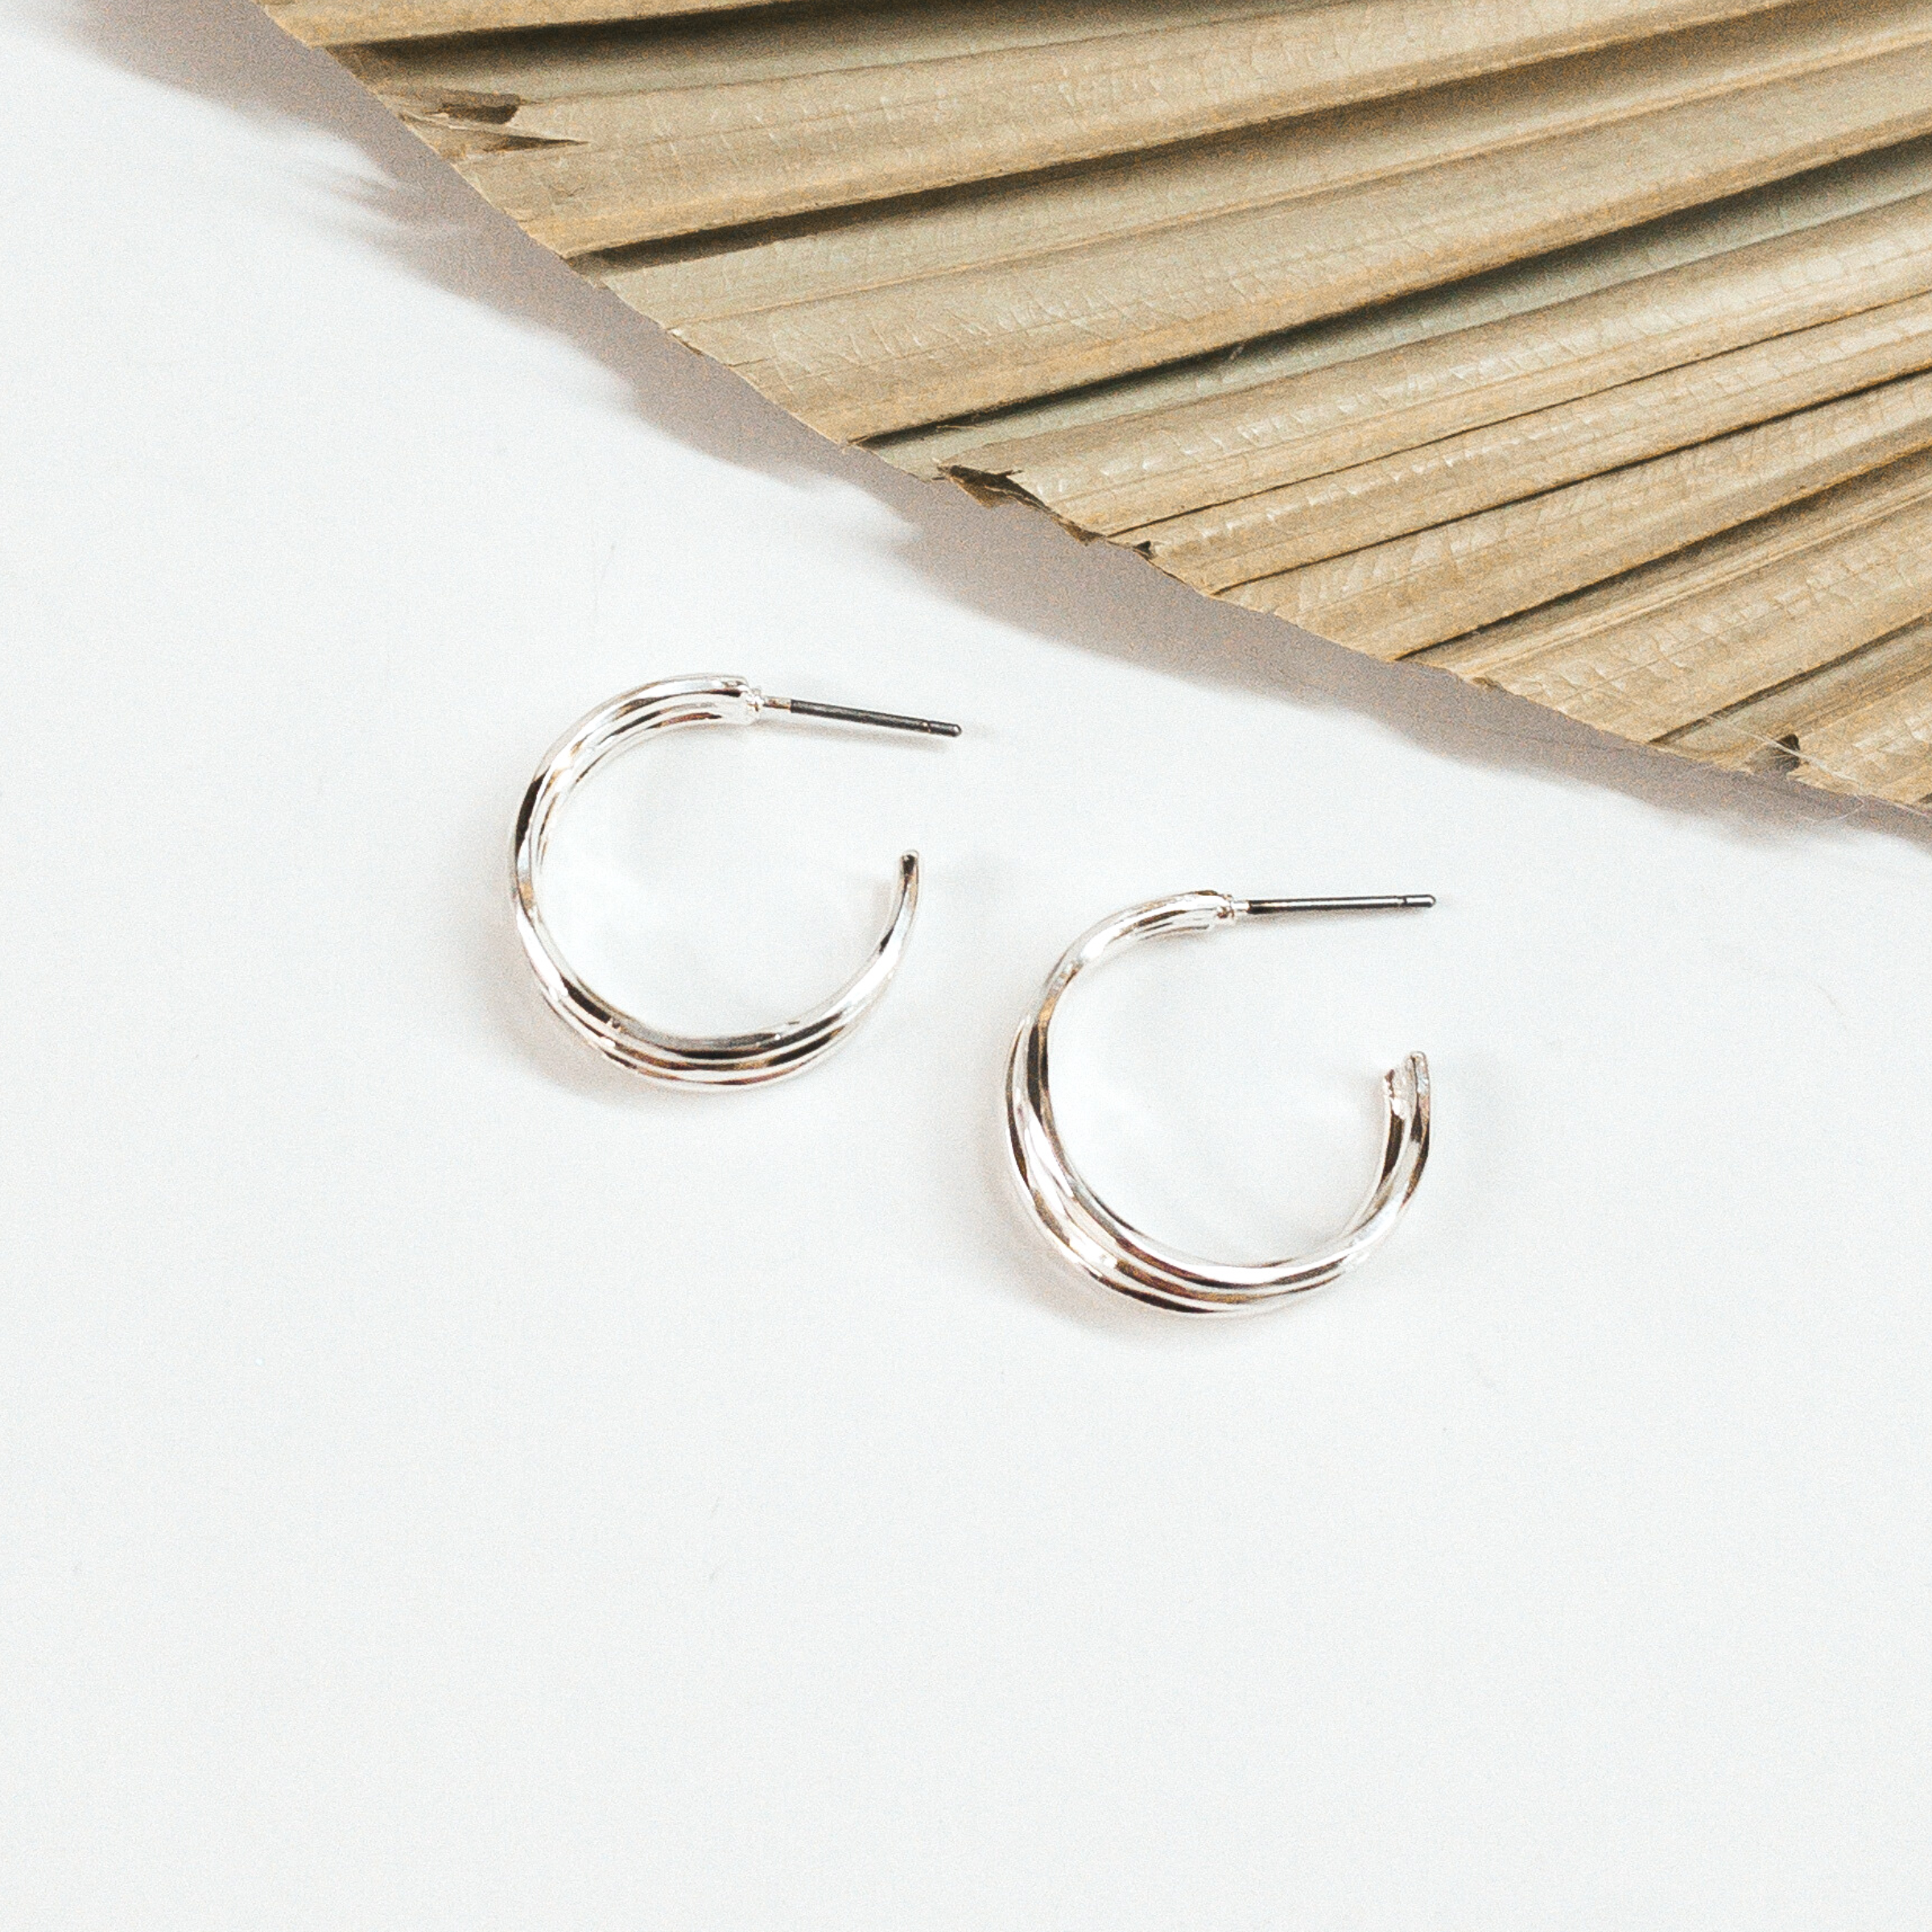 Good Karma Triple Hoop Earrings in Silver Tone - Giddy Up Glamour Boutique